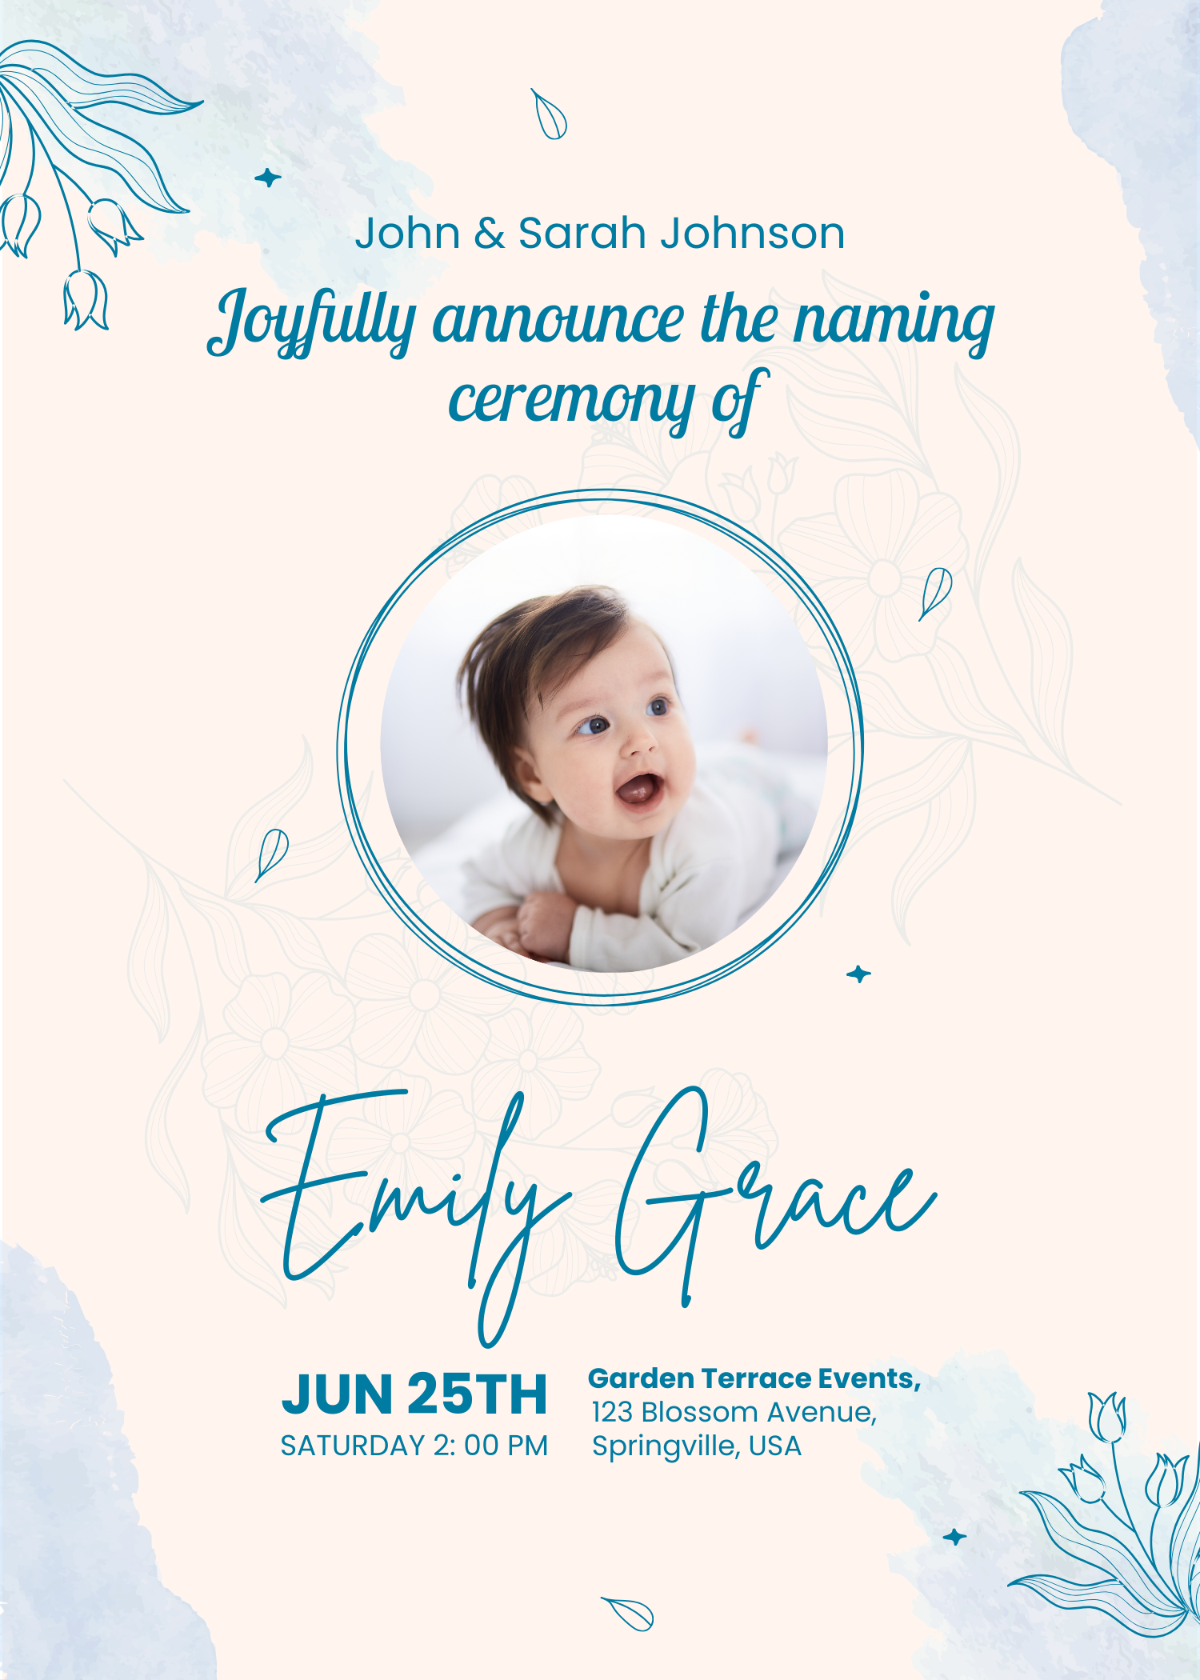 Free Naming Ceremony Announcement Invitation Template